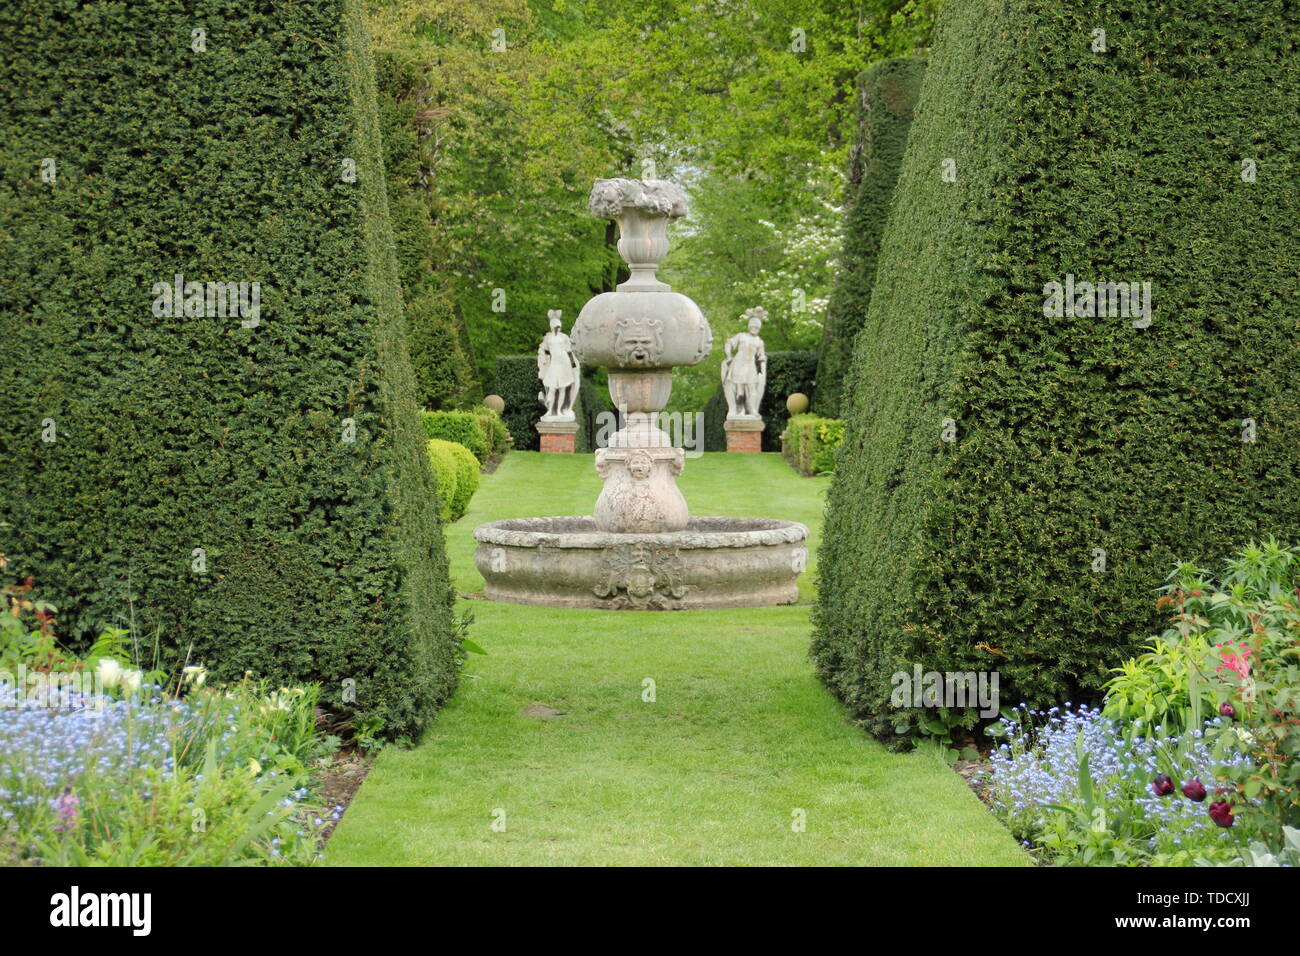 Taxus baccata. Statuary and herbacrous borders seen from yew hedging in the Italianate gardens at Renishaw Hall and Gardens, Derbyshire in May Stock Photo